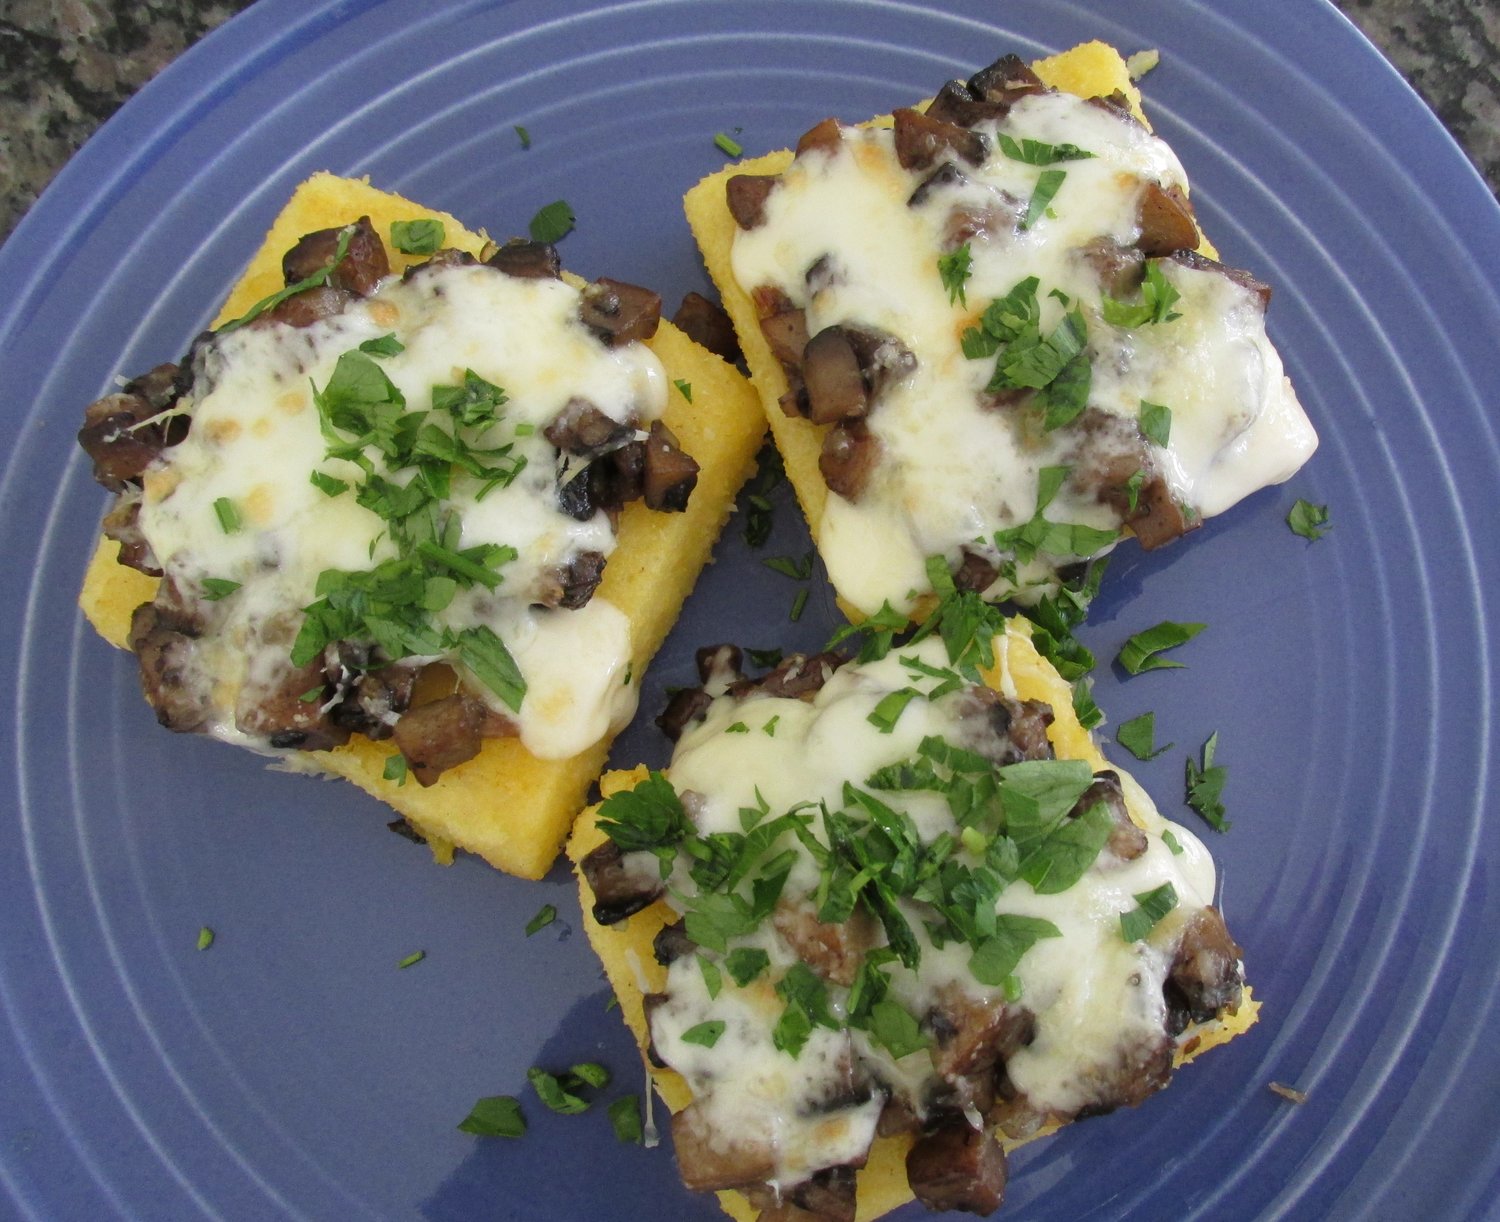 Grilled polenta, topped with sauteed mushrooms, truffle oil and fontina cheese